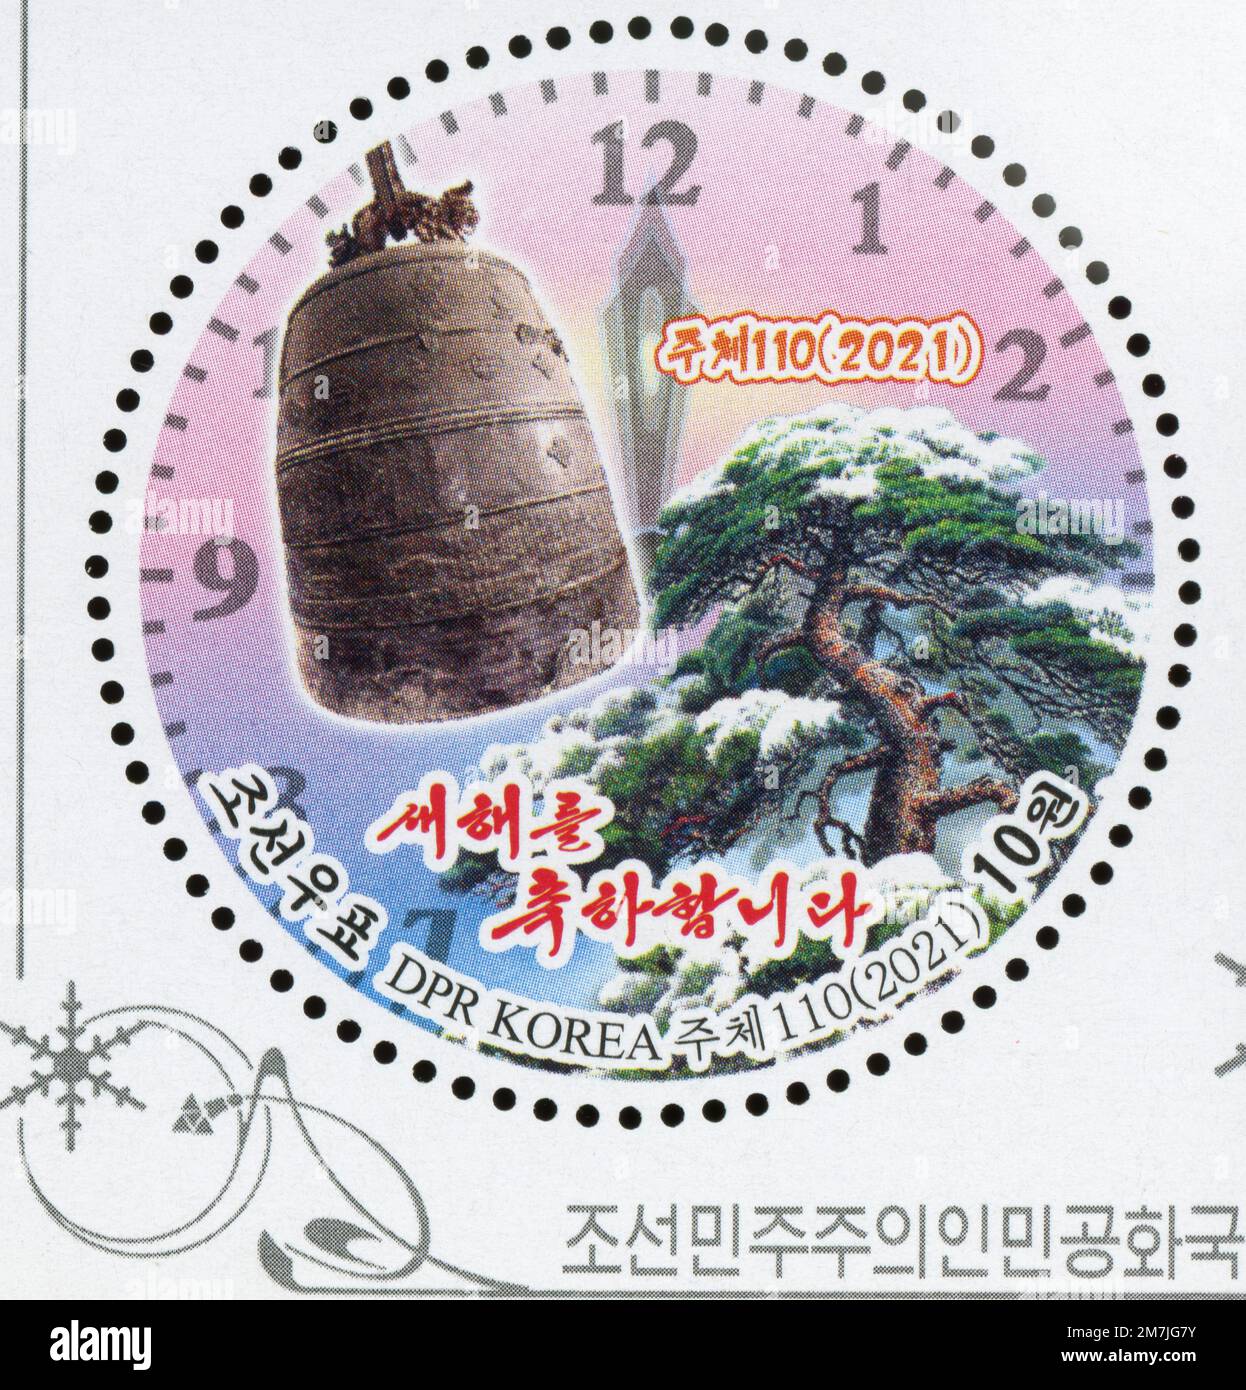 2021 North Korea stamp. Happy New Year with Pyongyang Bell and national pine tree of Korea Pinus densiflora covered with snow Stock Photo